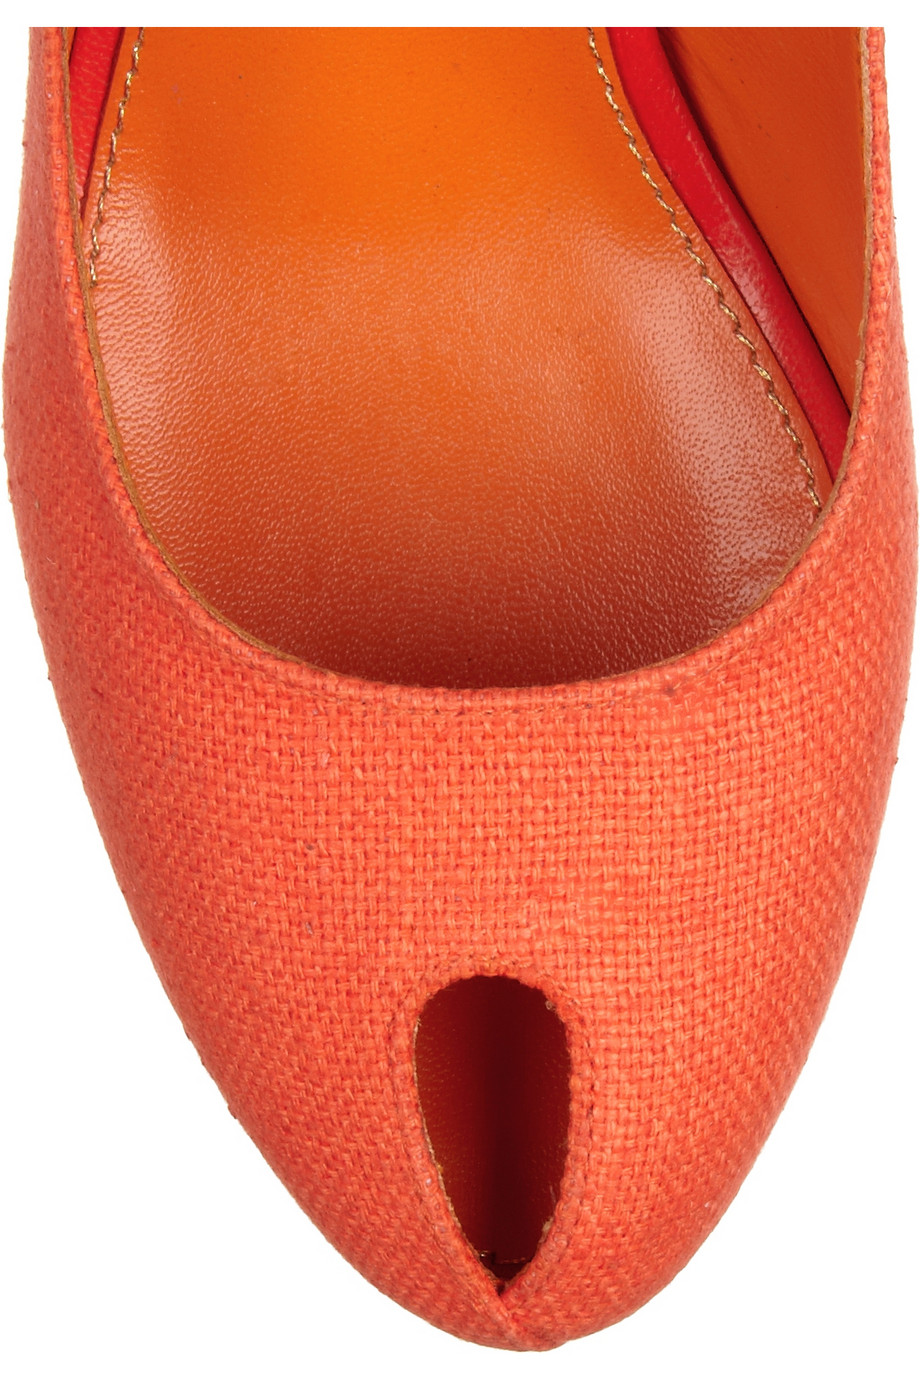 Sergio Rossi Canvascovered Leather Platform Pumps in Orange - Lyst